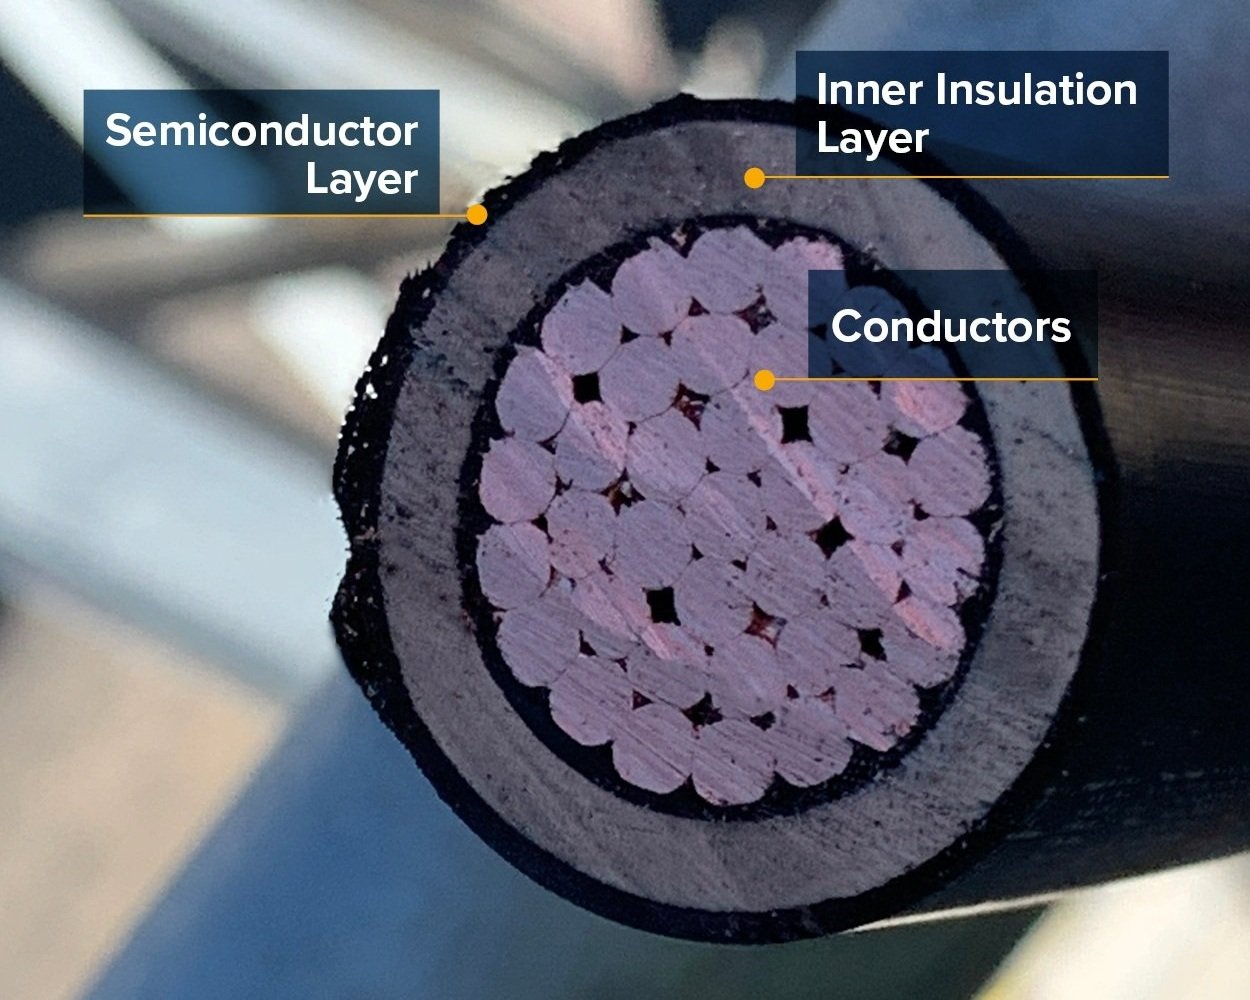  Each phase of this 3/C 5kV cable has a semiconductor layer, an inner insulation layer, and conductors. The semiconductor layer keeps the electrical stress potential symmetrical. Otherwise, the stress would go to the weakest point, creating a potenti